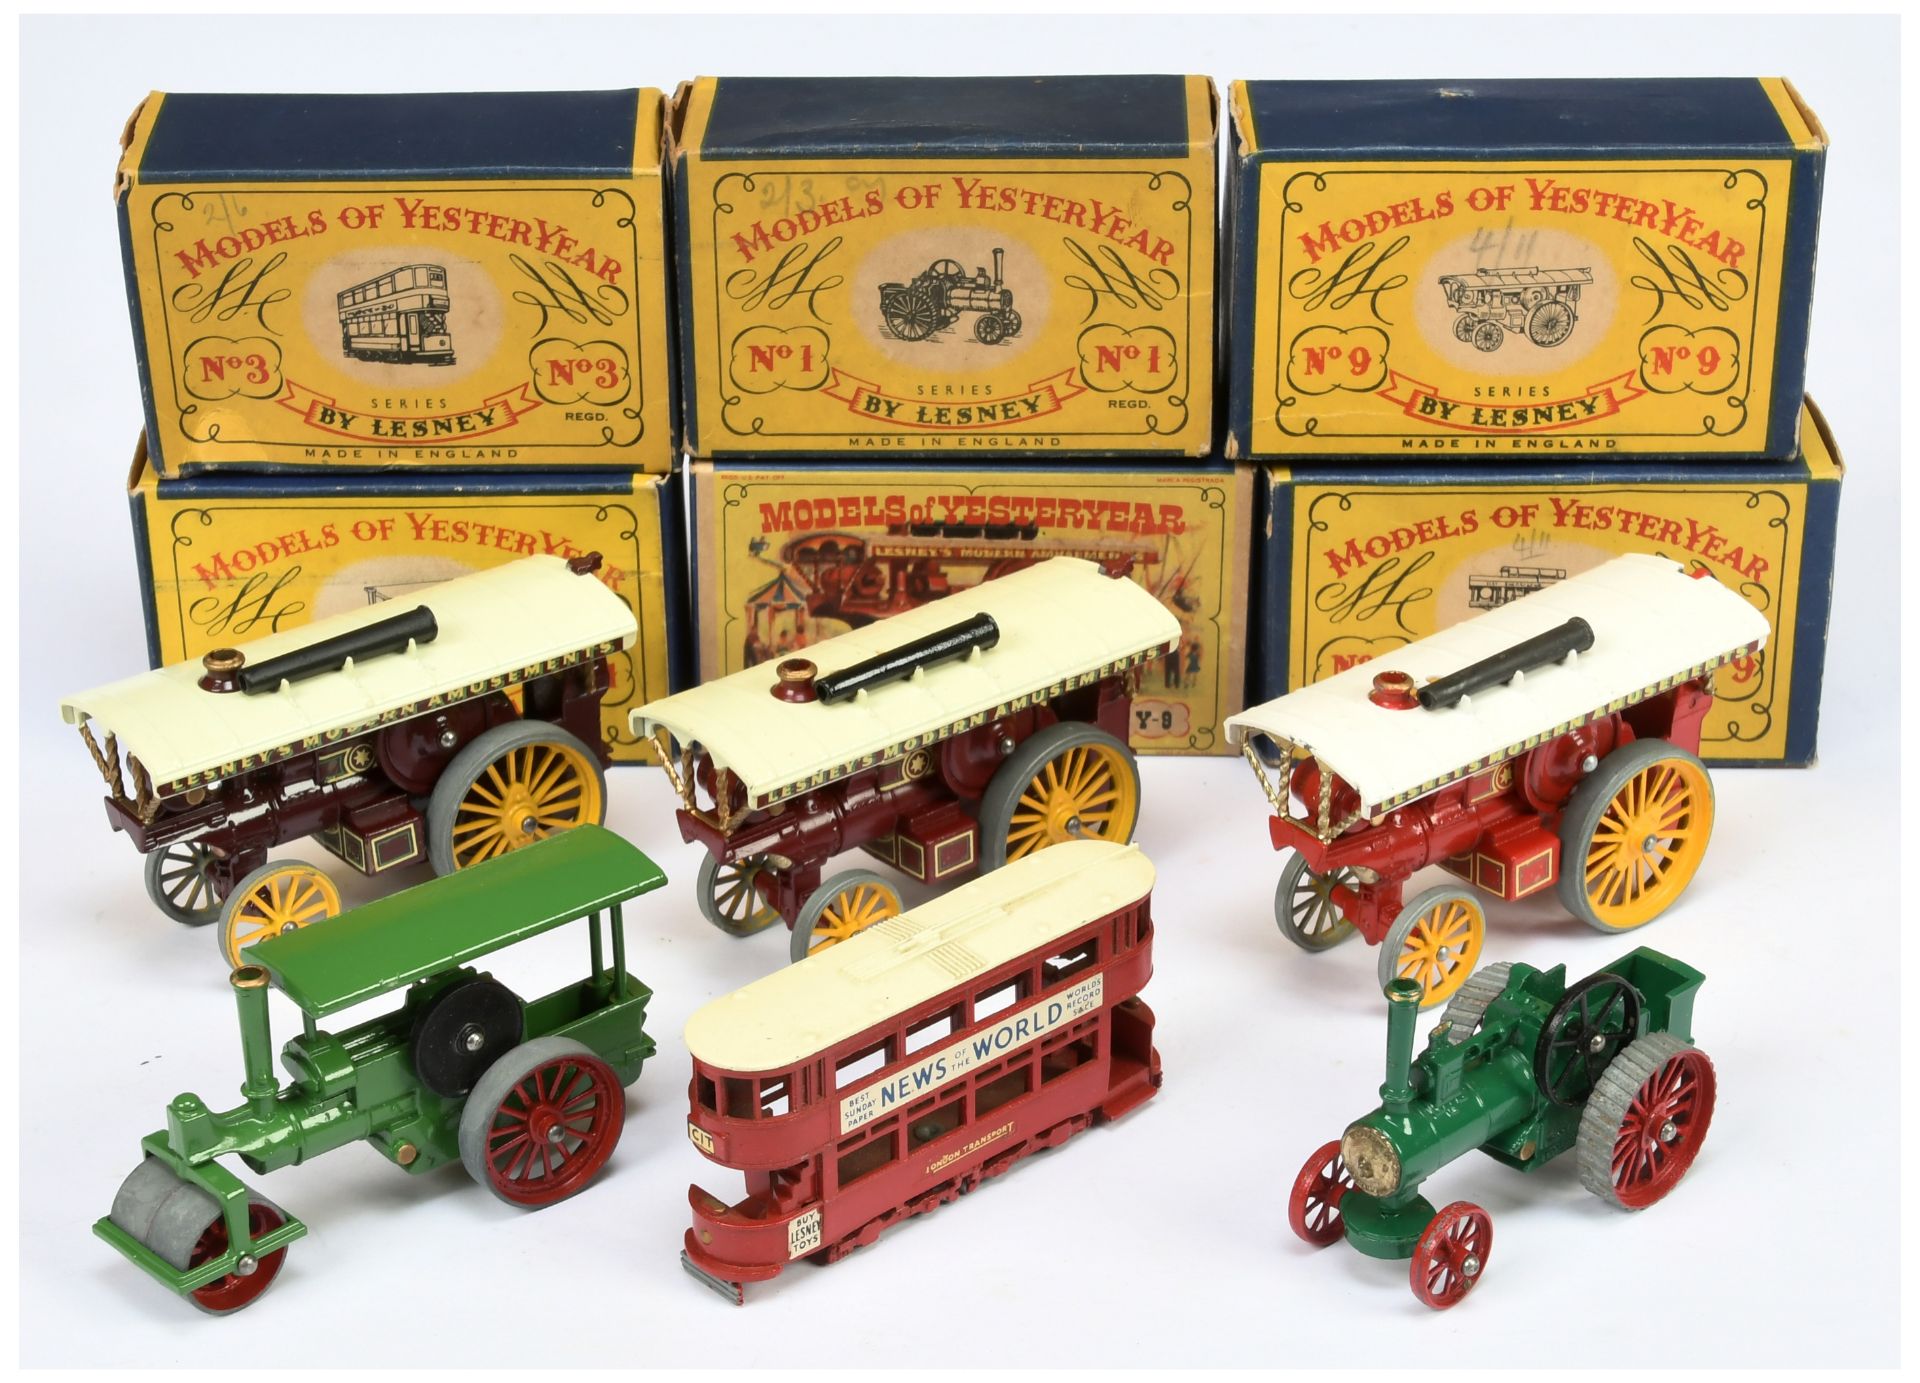 Matchbox Models Of Yesteryear Group 6 - (1) Y3 E-Class tram Car "News Of The World" - red, (2) Y1...